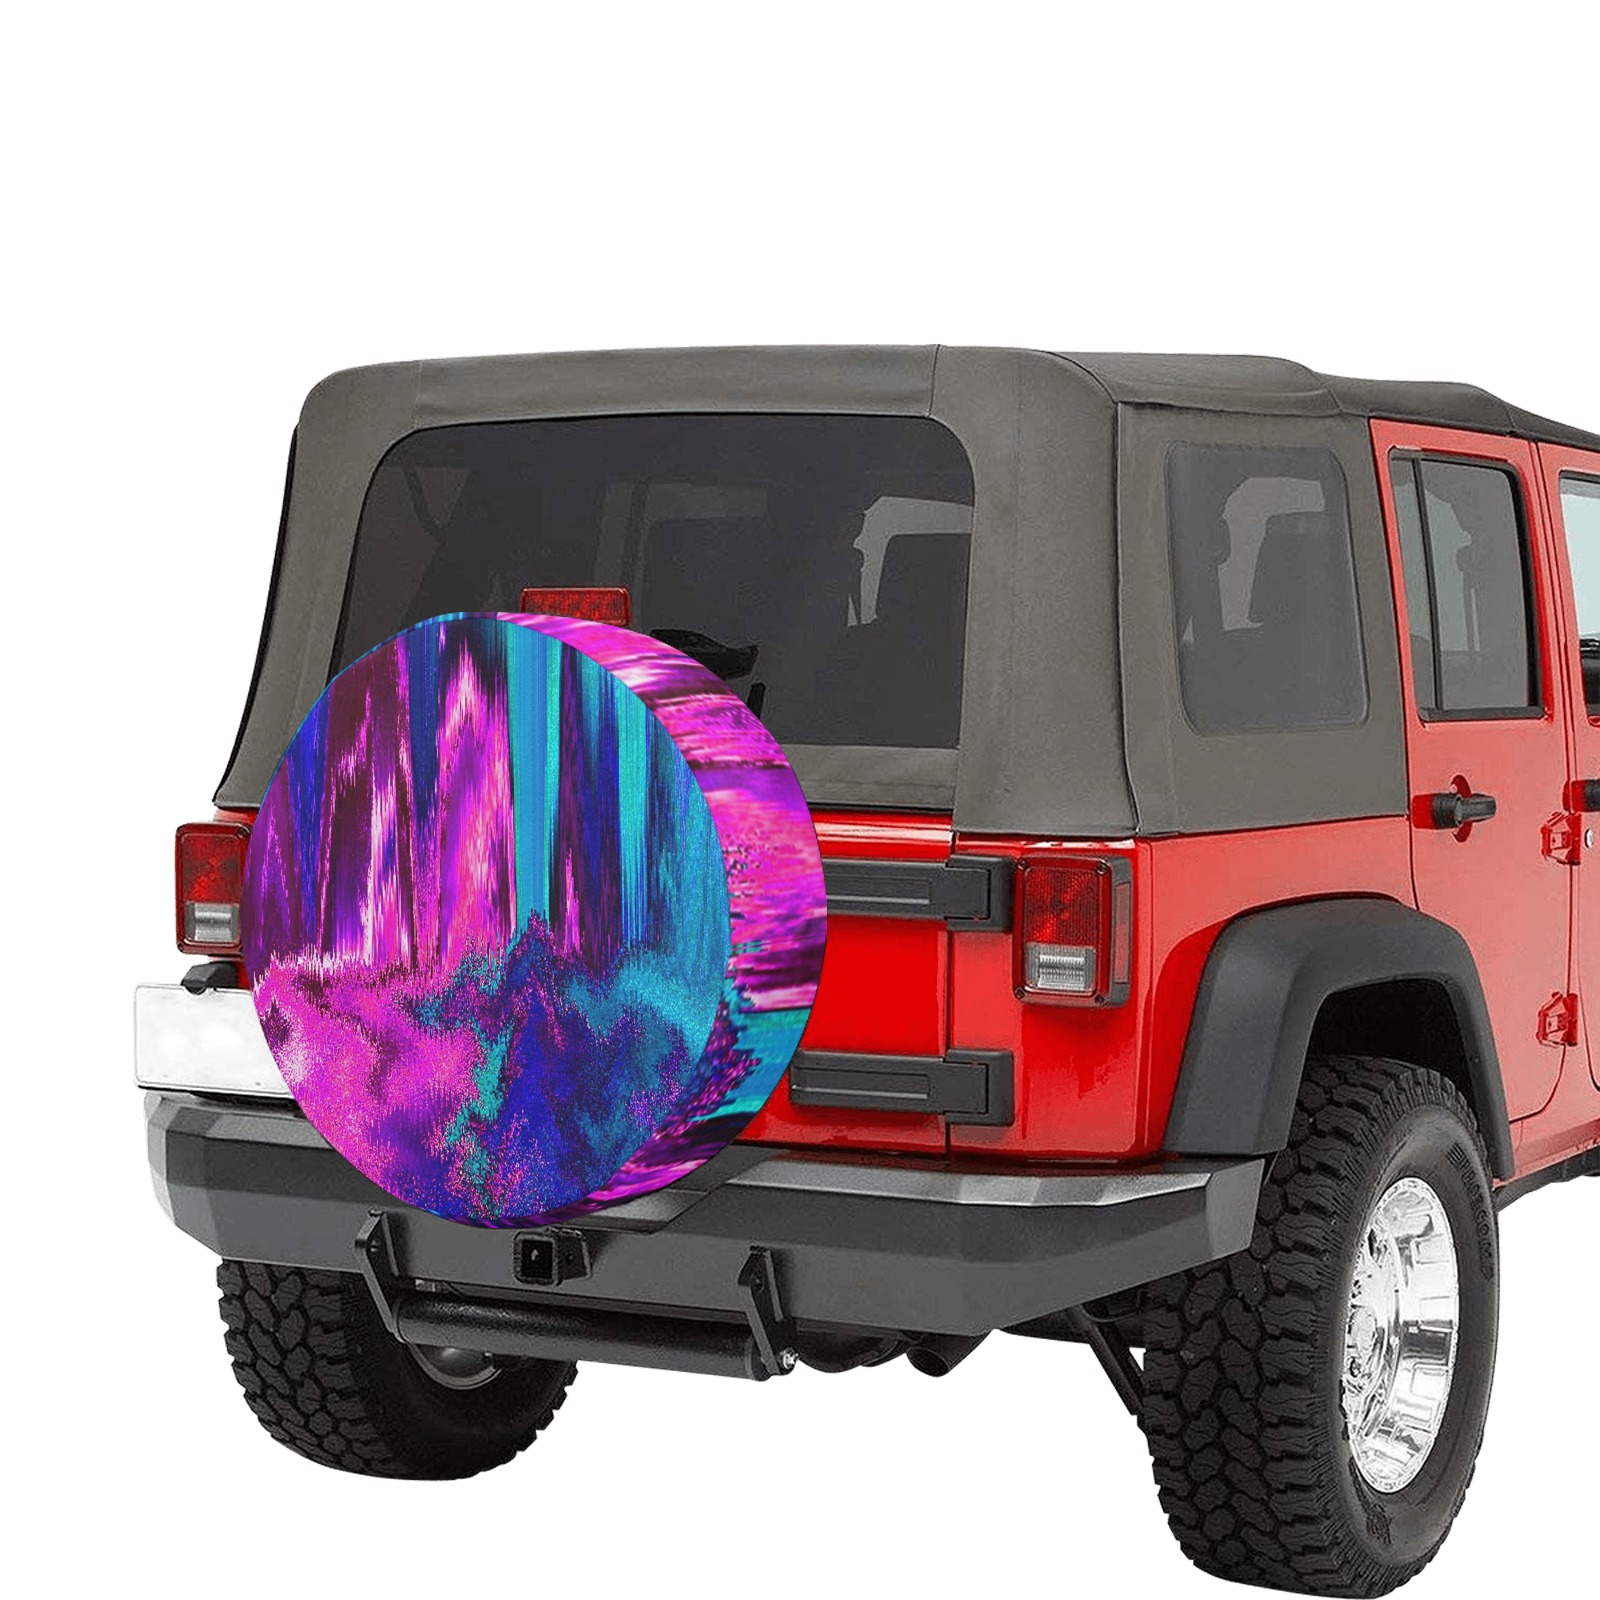 Melted Glitch (Pink & Teal) 30 Inch Spare Tire Cover